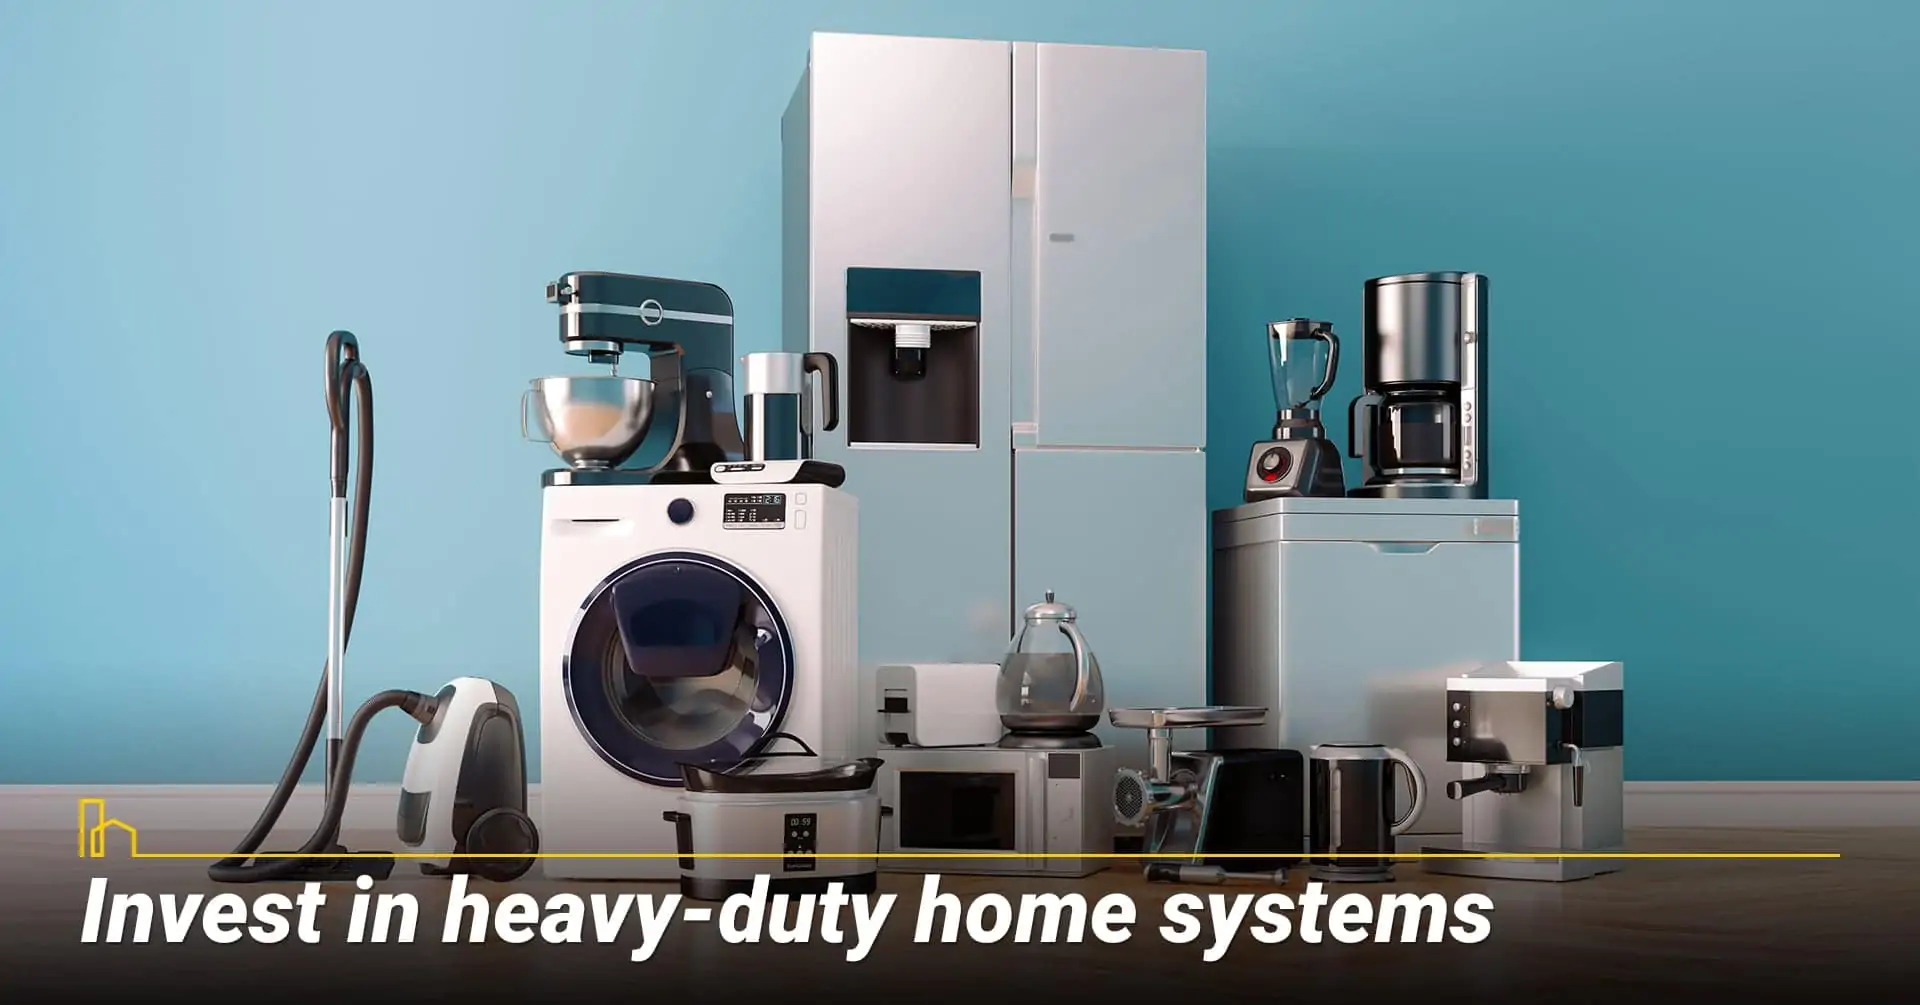 Invest in heavy-duty home systems, invest in quality items